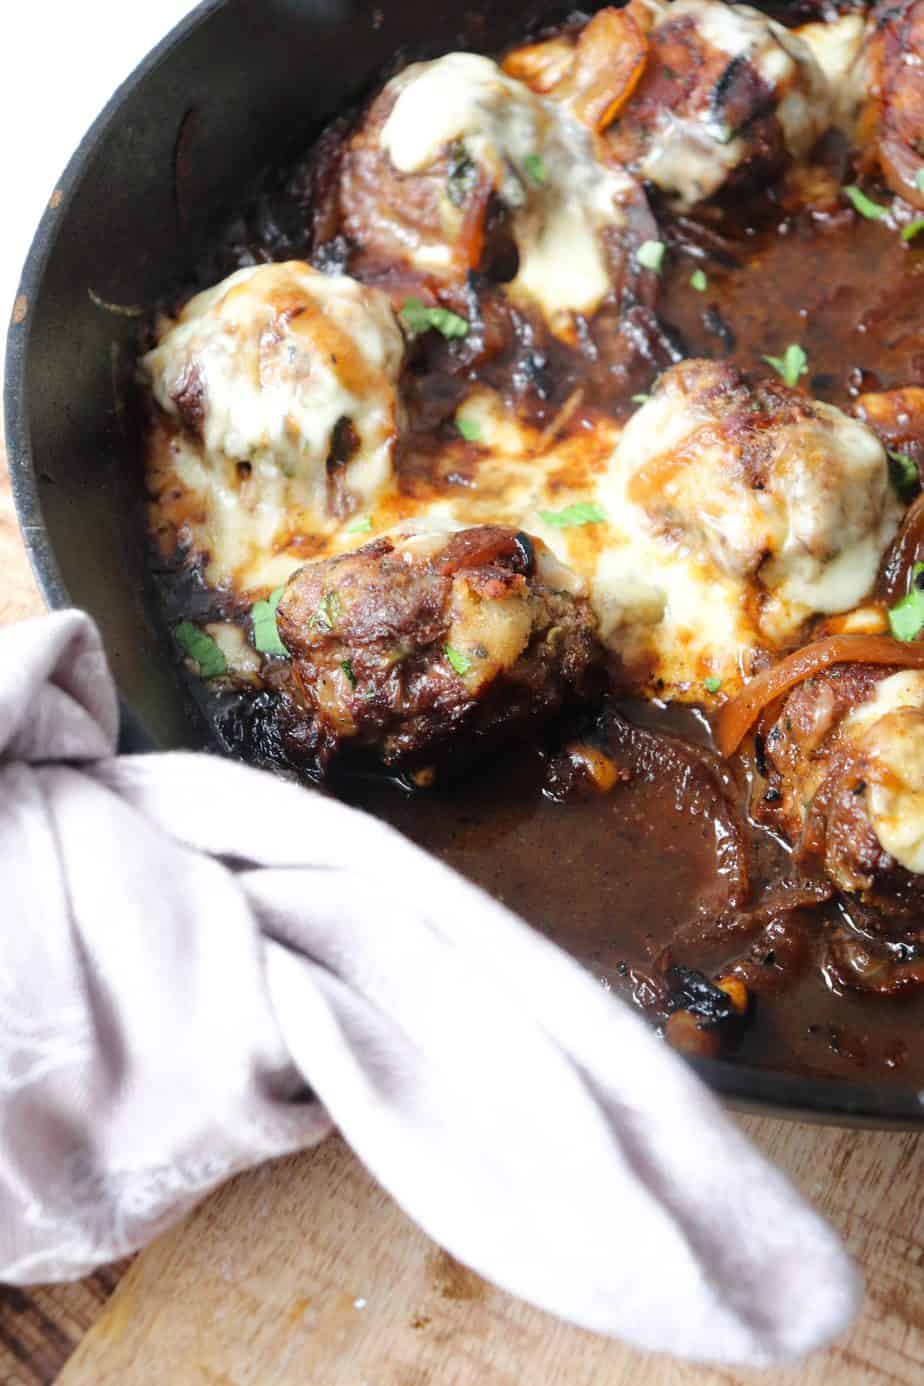 skillet full of meatballs and melted cheese.